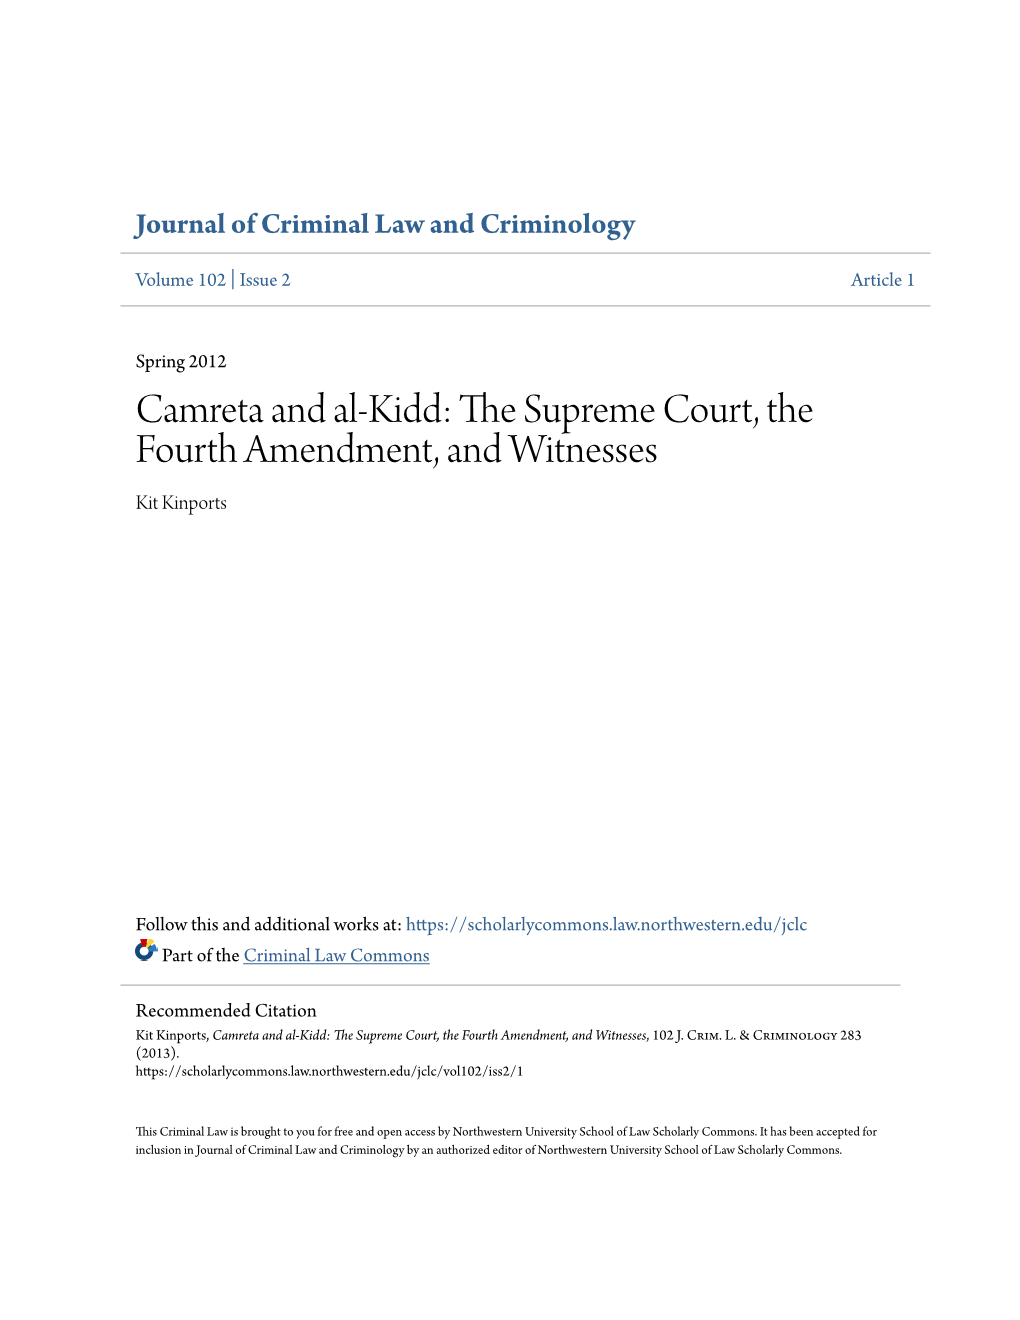 The Supreme Court, the Fourth Amendment, and Witnesses, 102 J